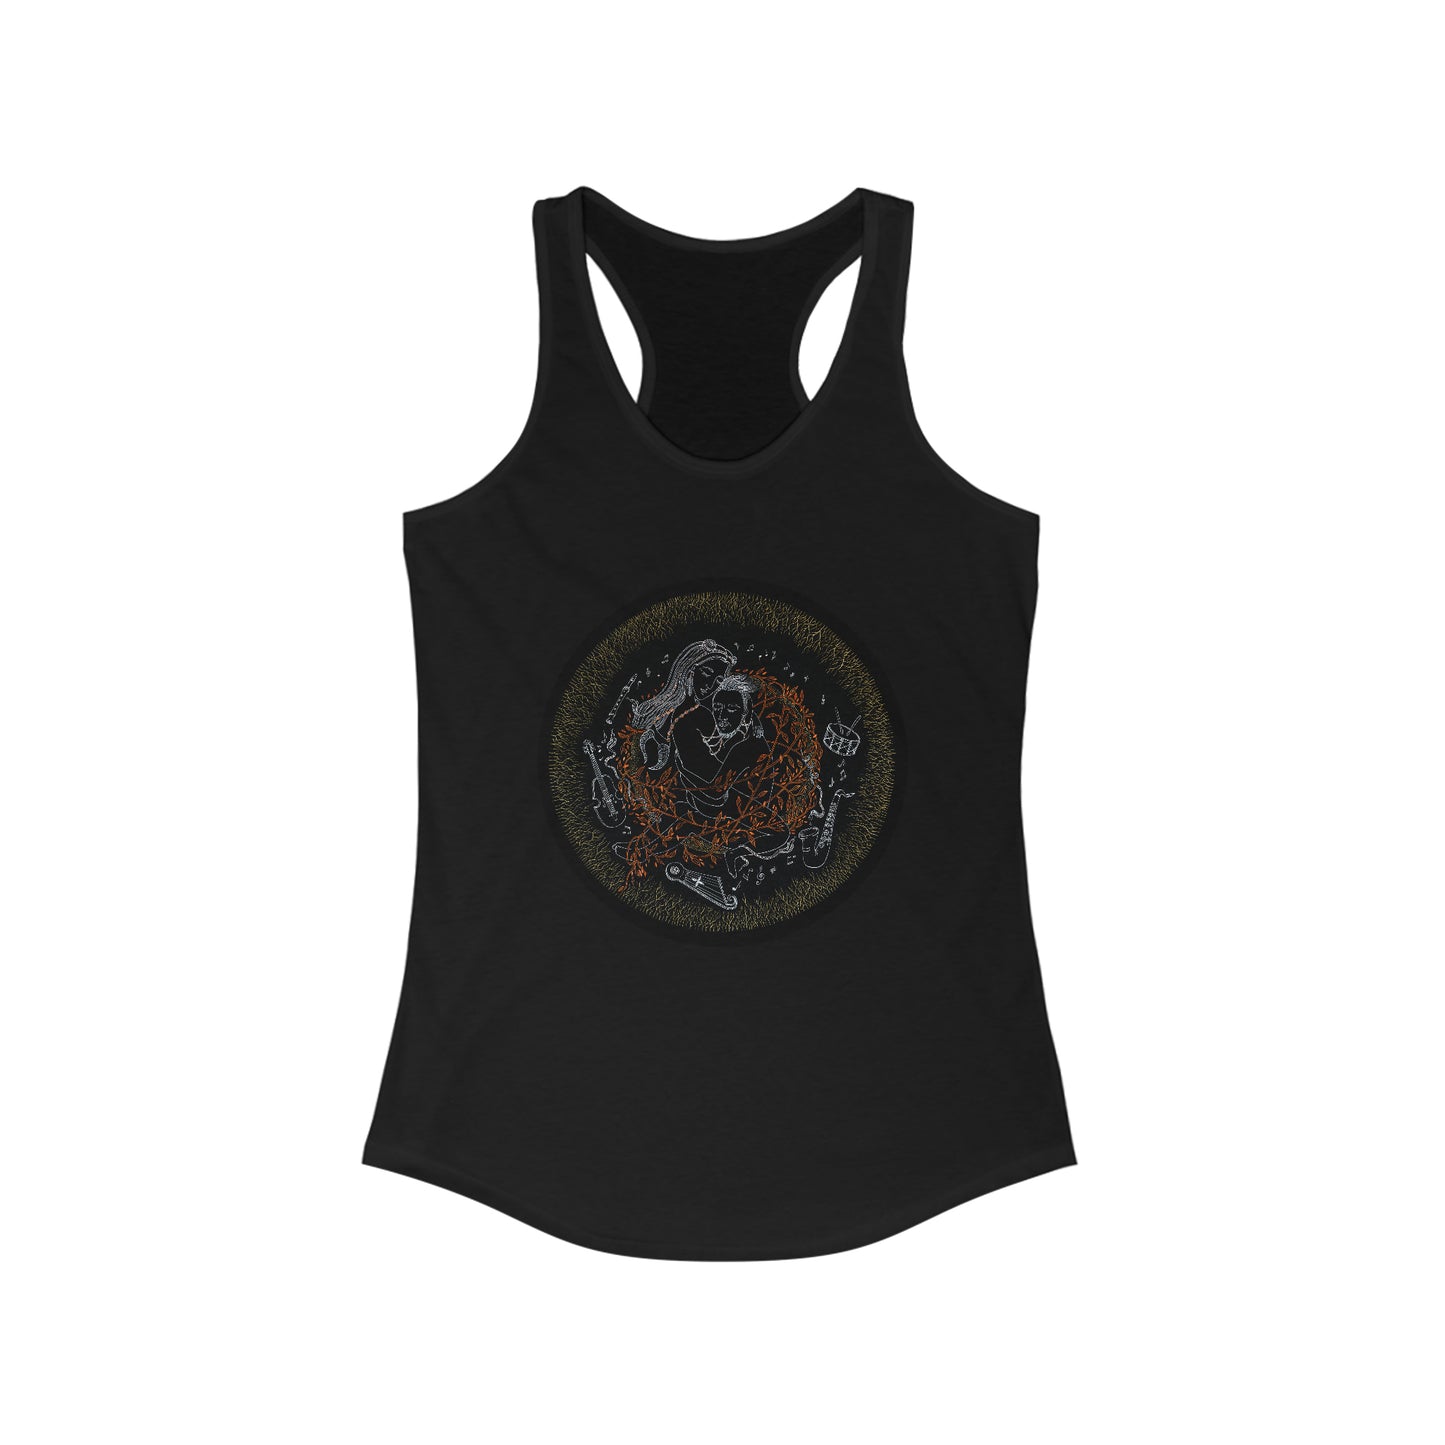 Chinese Zodiac Sign Tank Top (Ox)